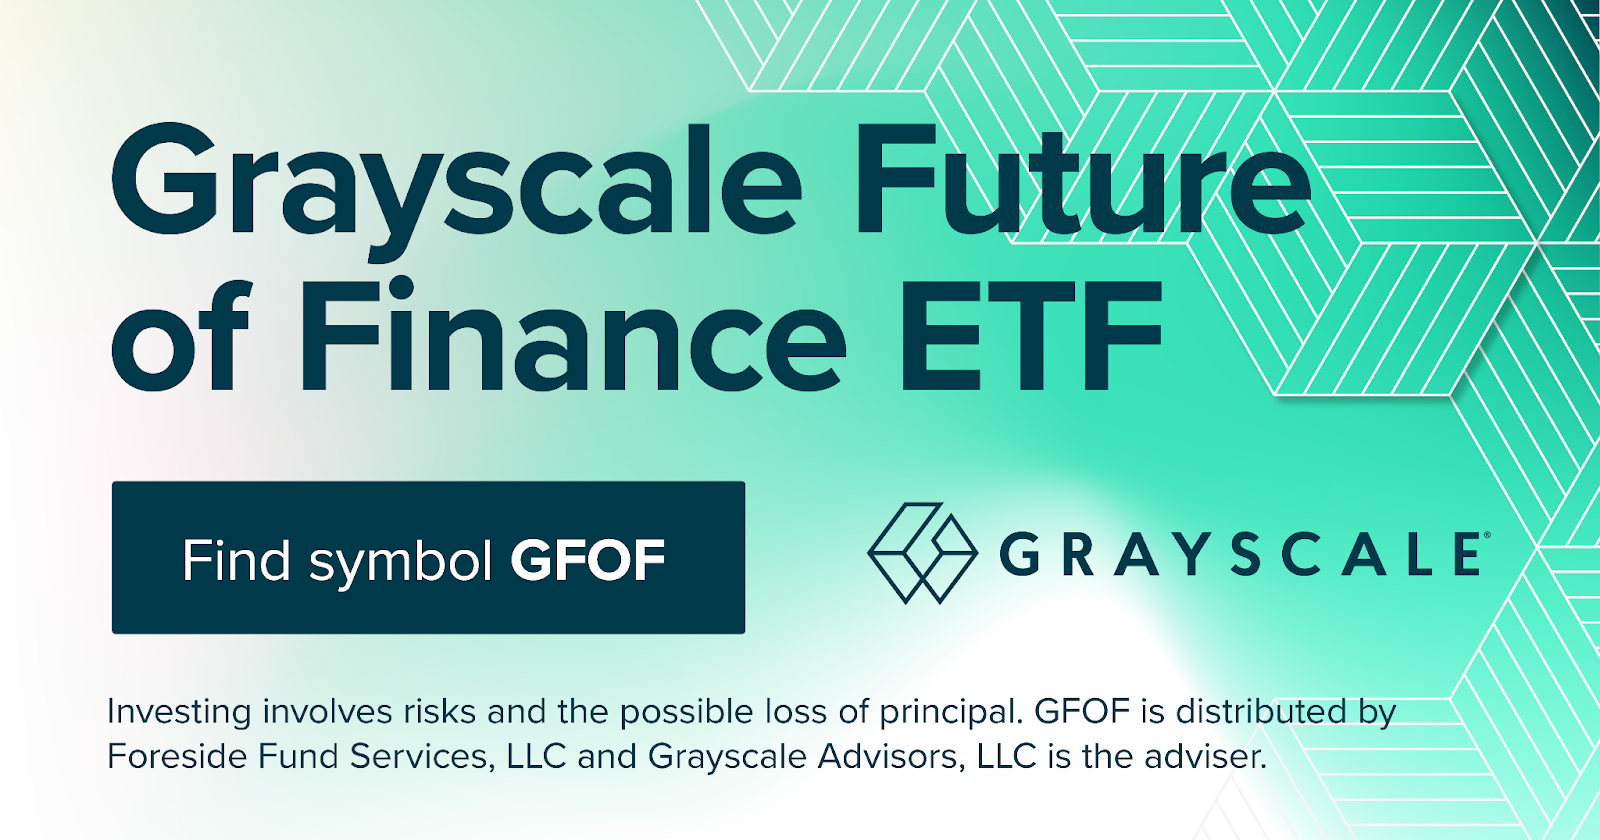 Blog - The Grayscale Future of Finance ETF